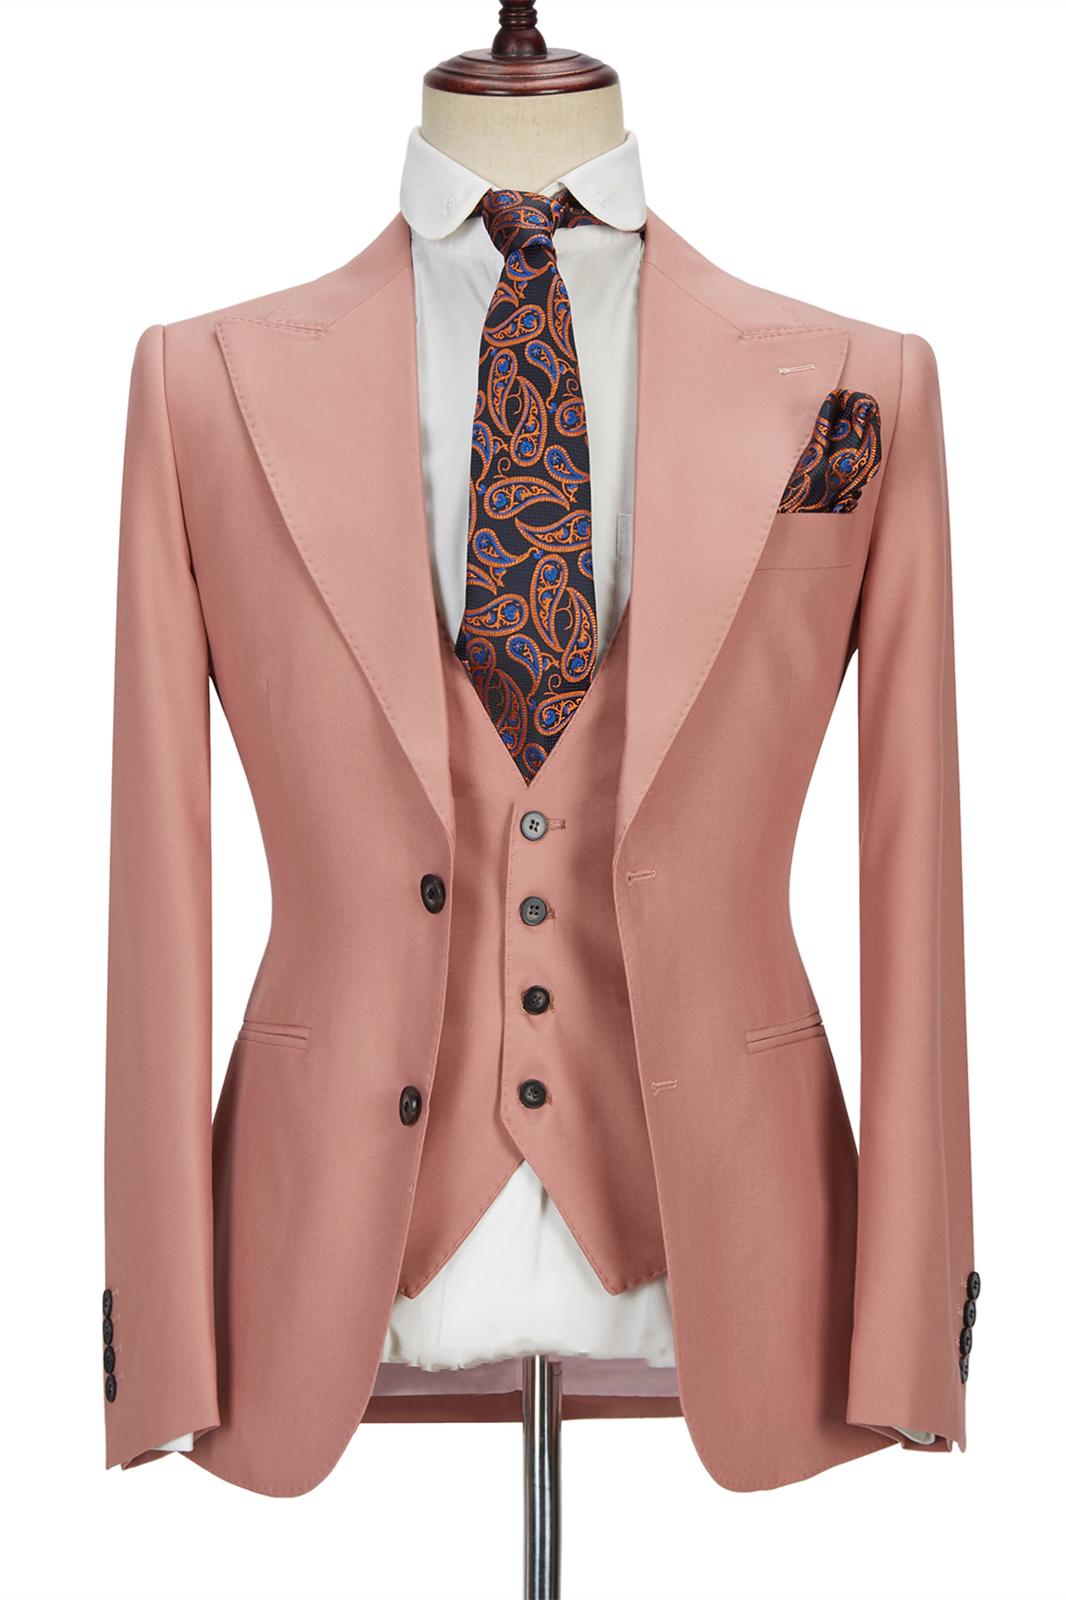 Dresseswow Pink 2 Buttons Marriage Suit For Men Three Piecess With Peak Lapel